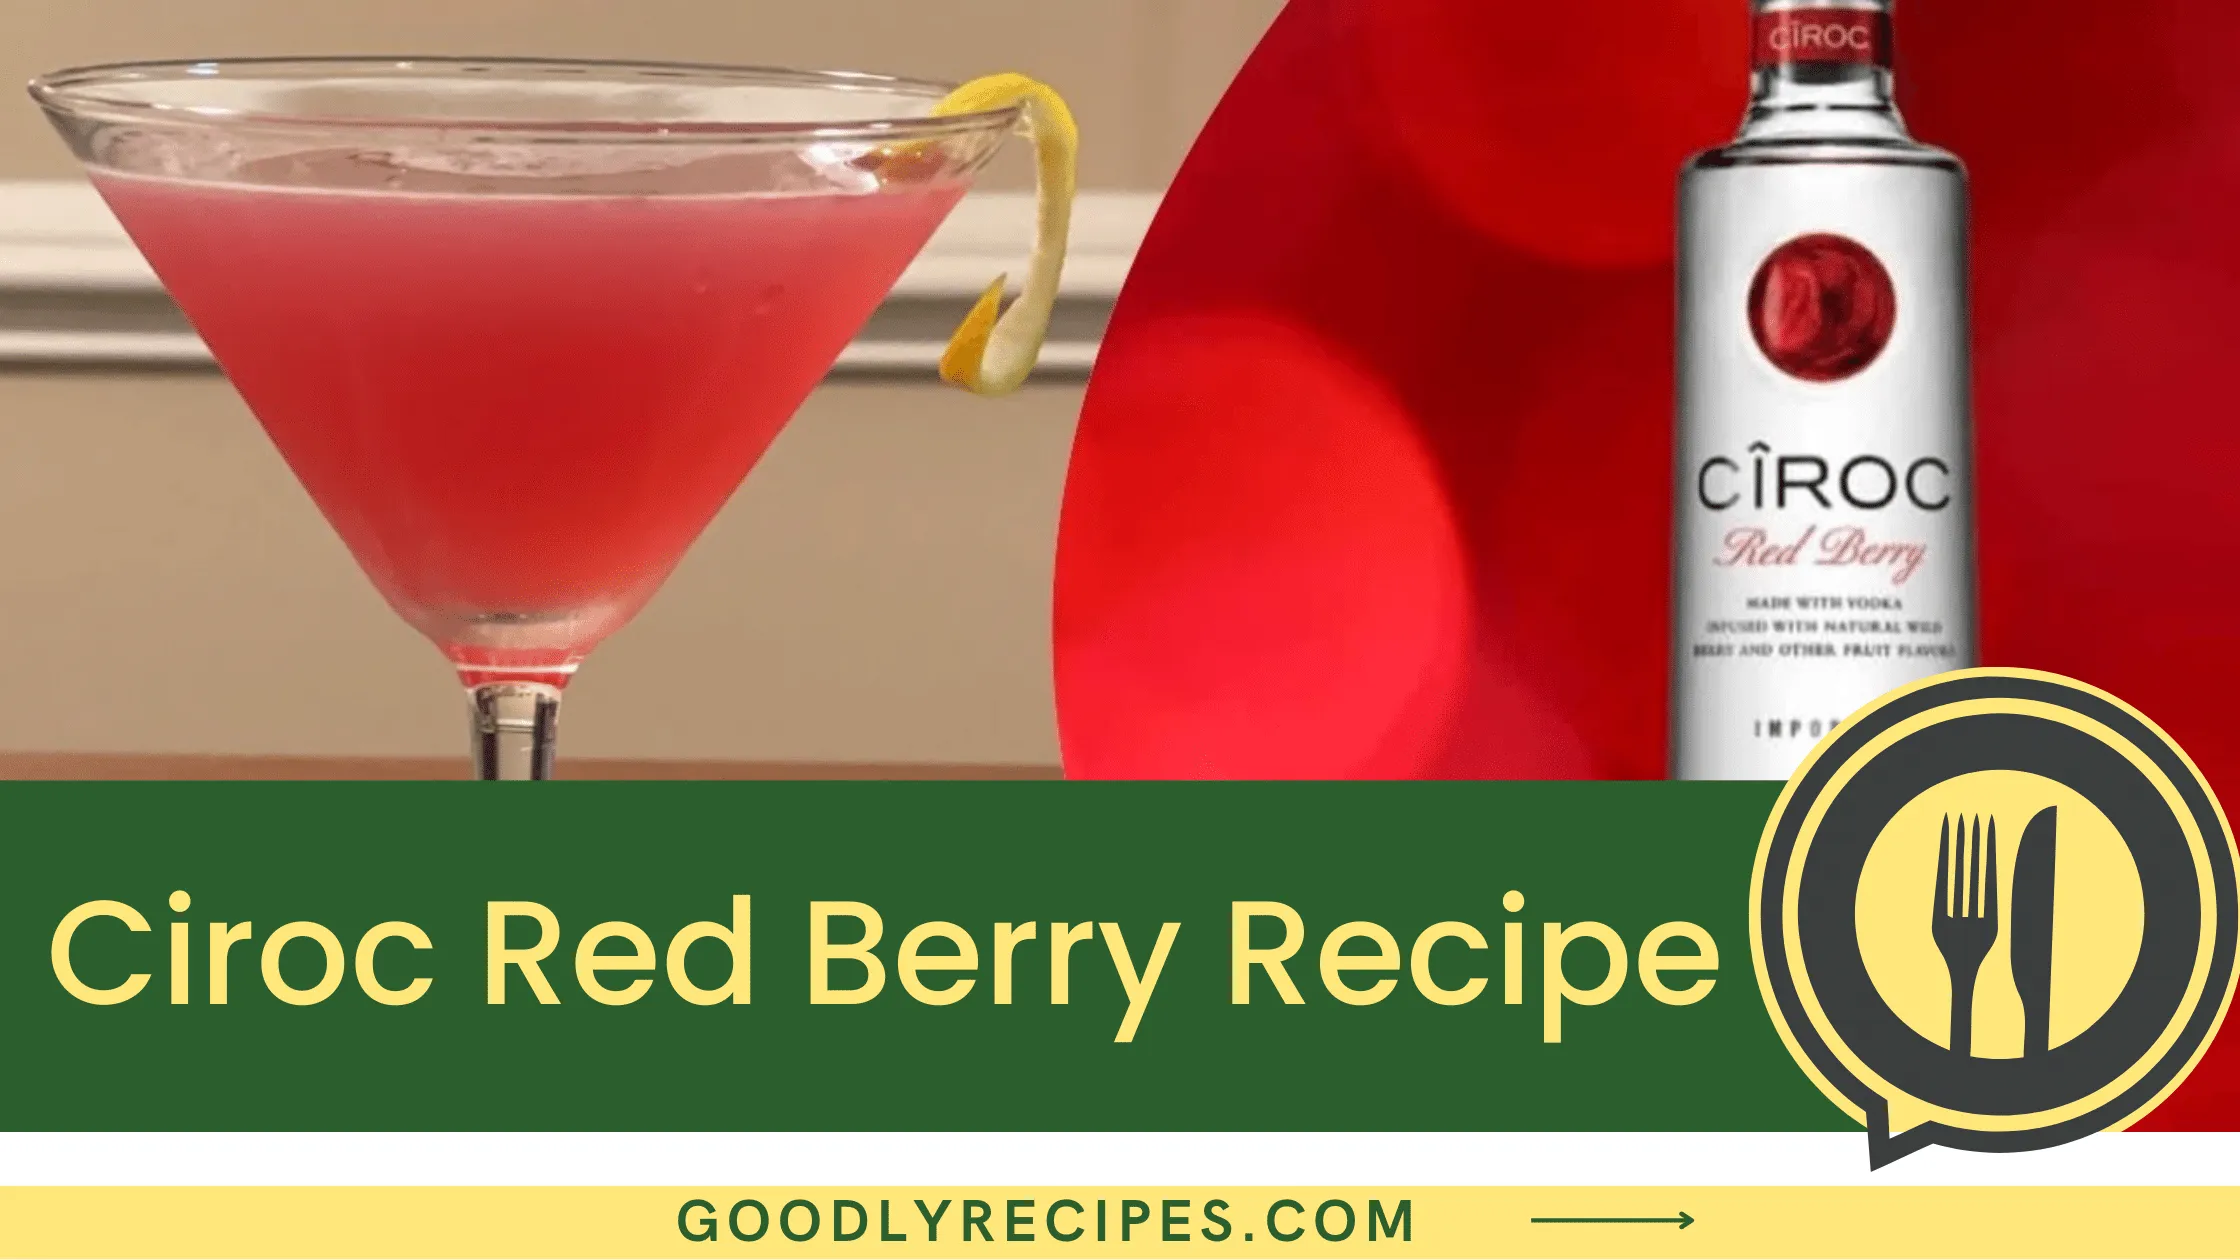 Ciroc Red Berry Recipe - For Food Lovers